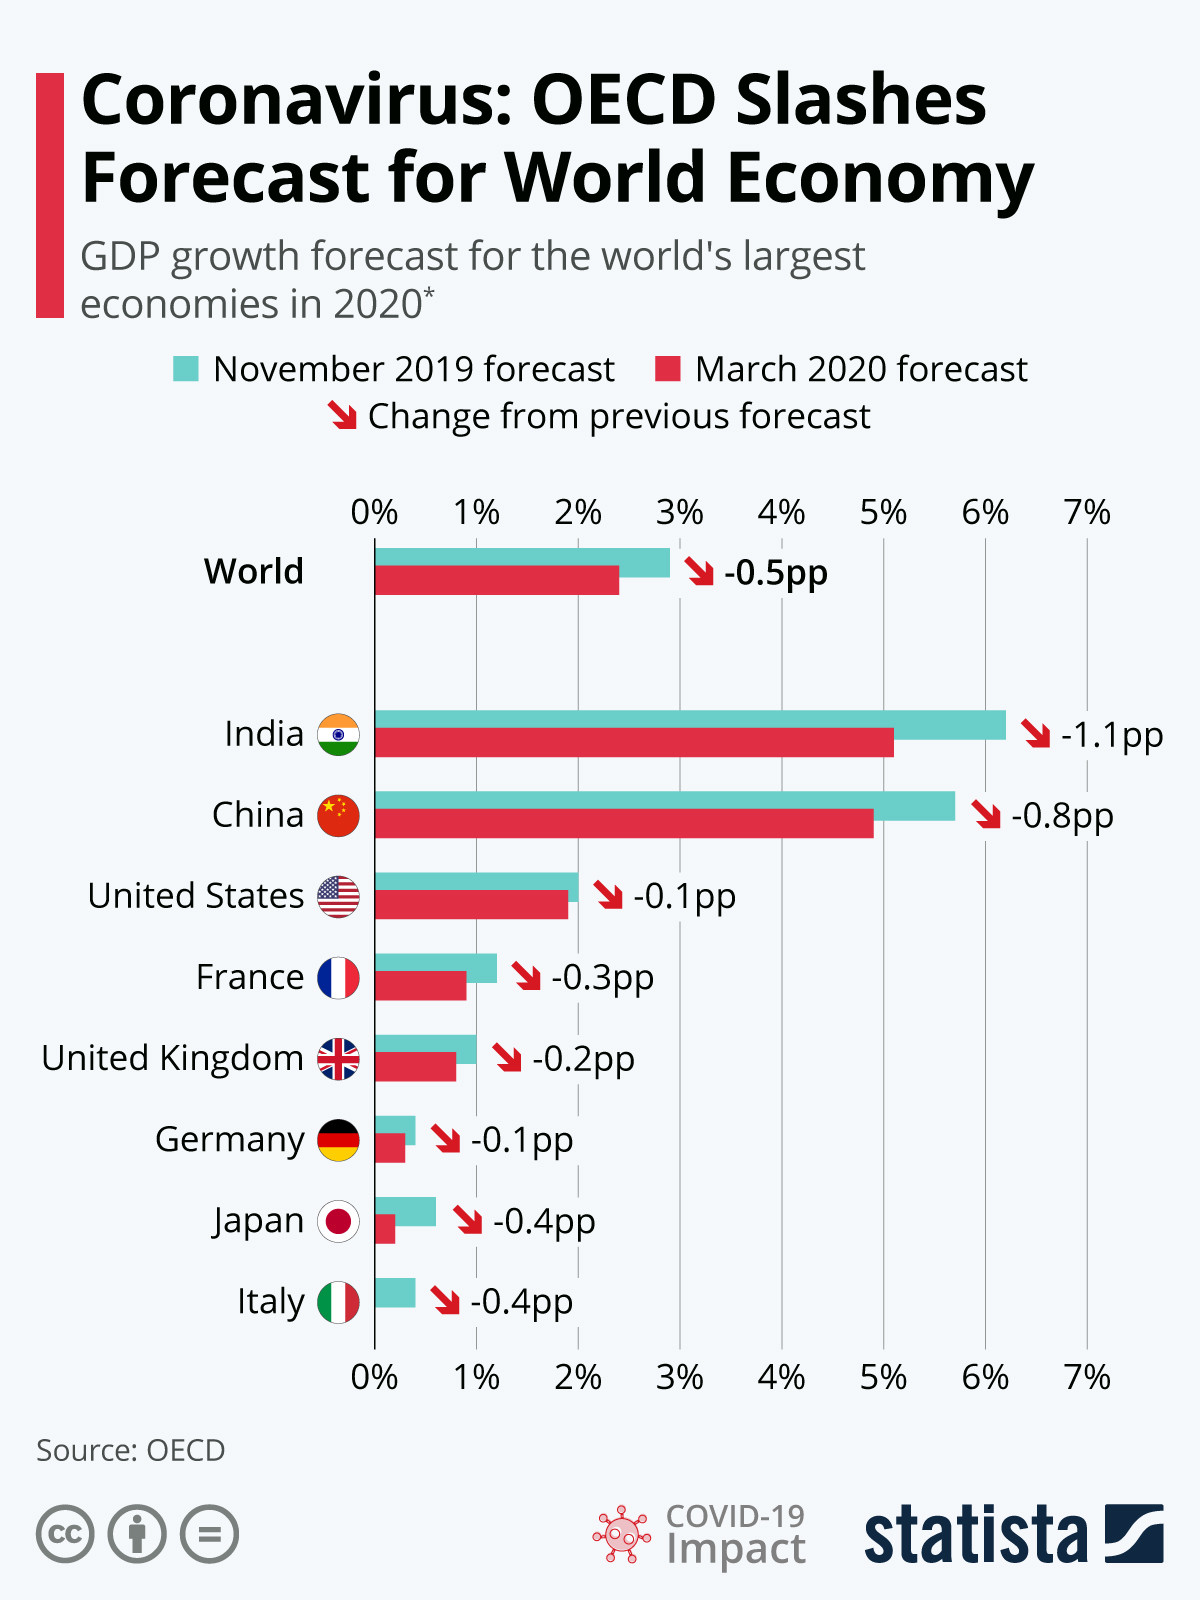 The OECD's forecast for the global economy